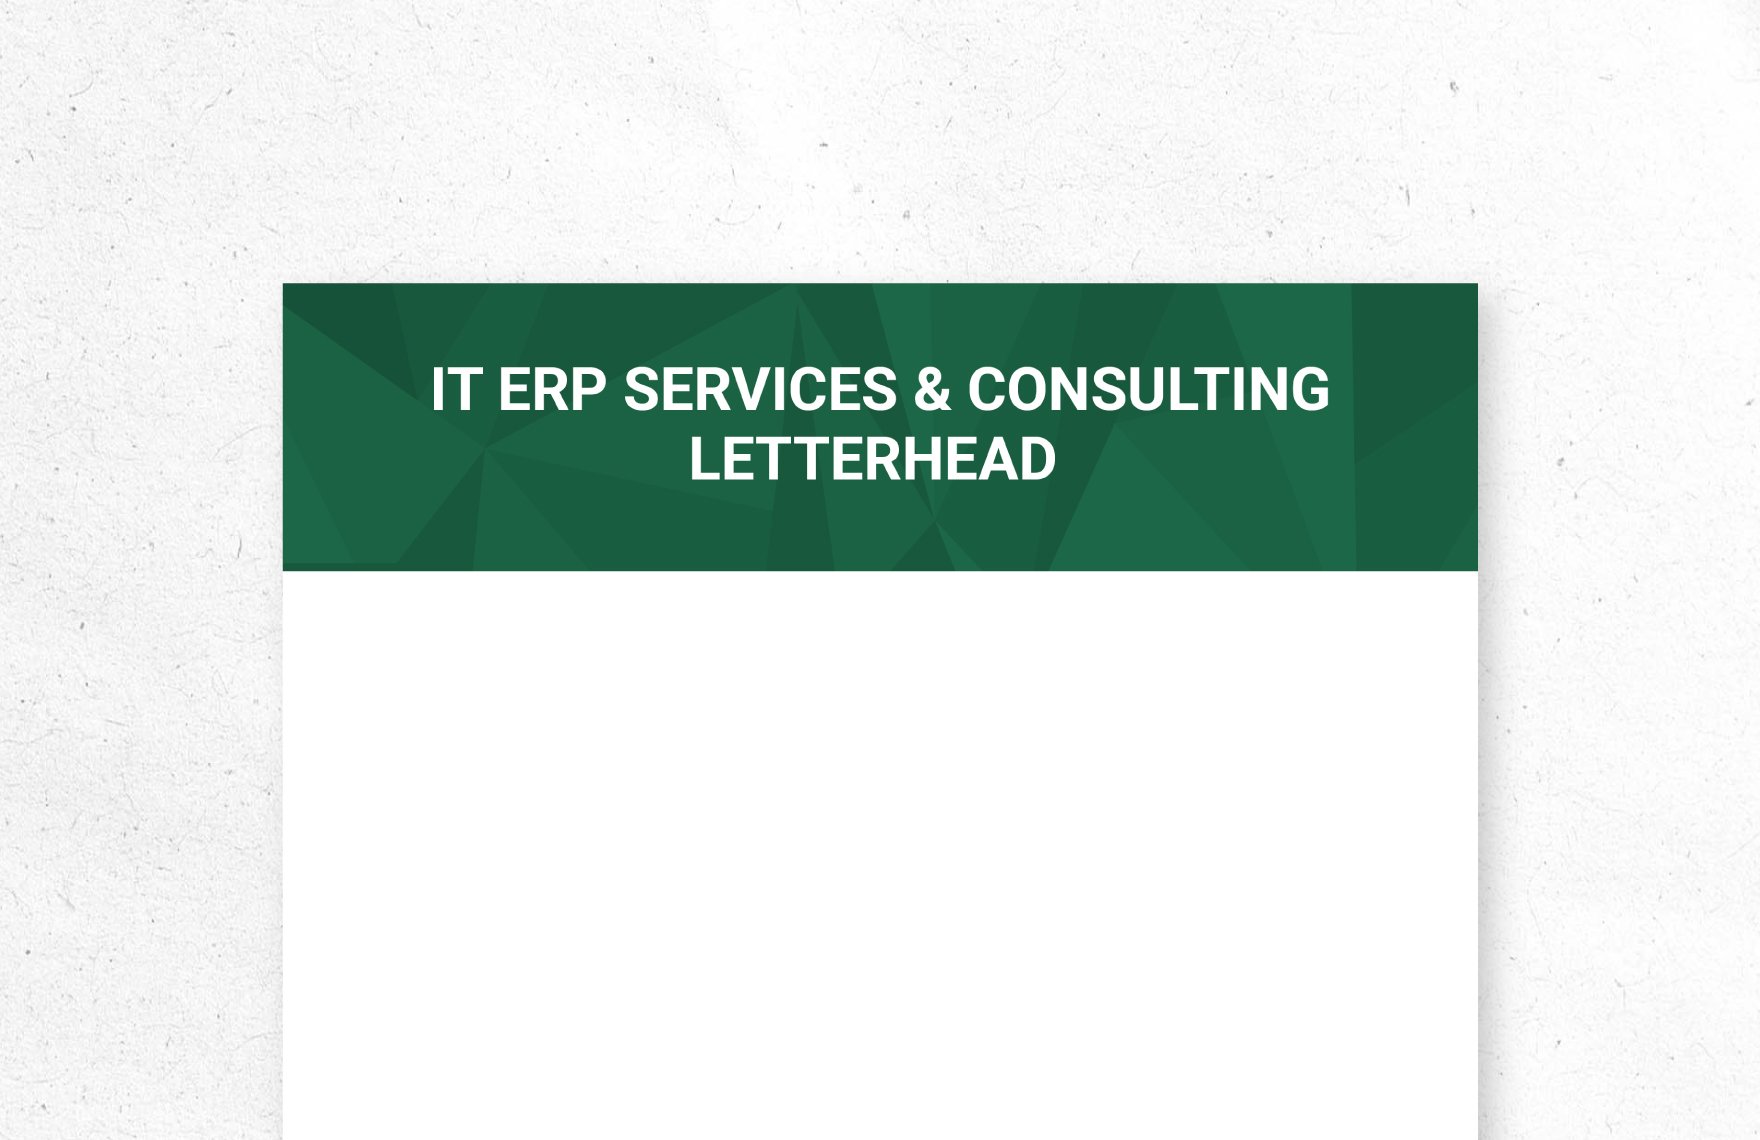 IT ERP Services & Consulting Letterhead Template in Word, Illustrator, PSD